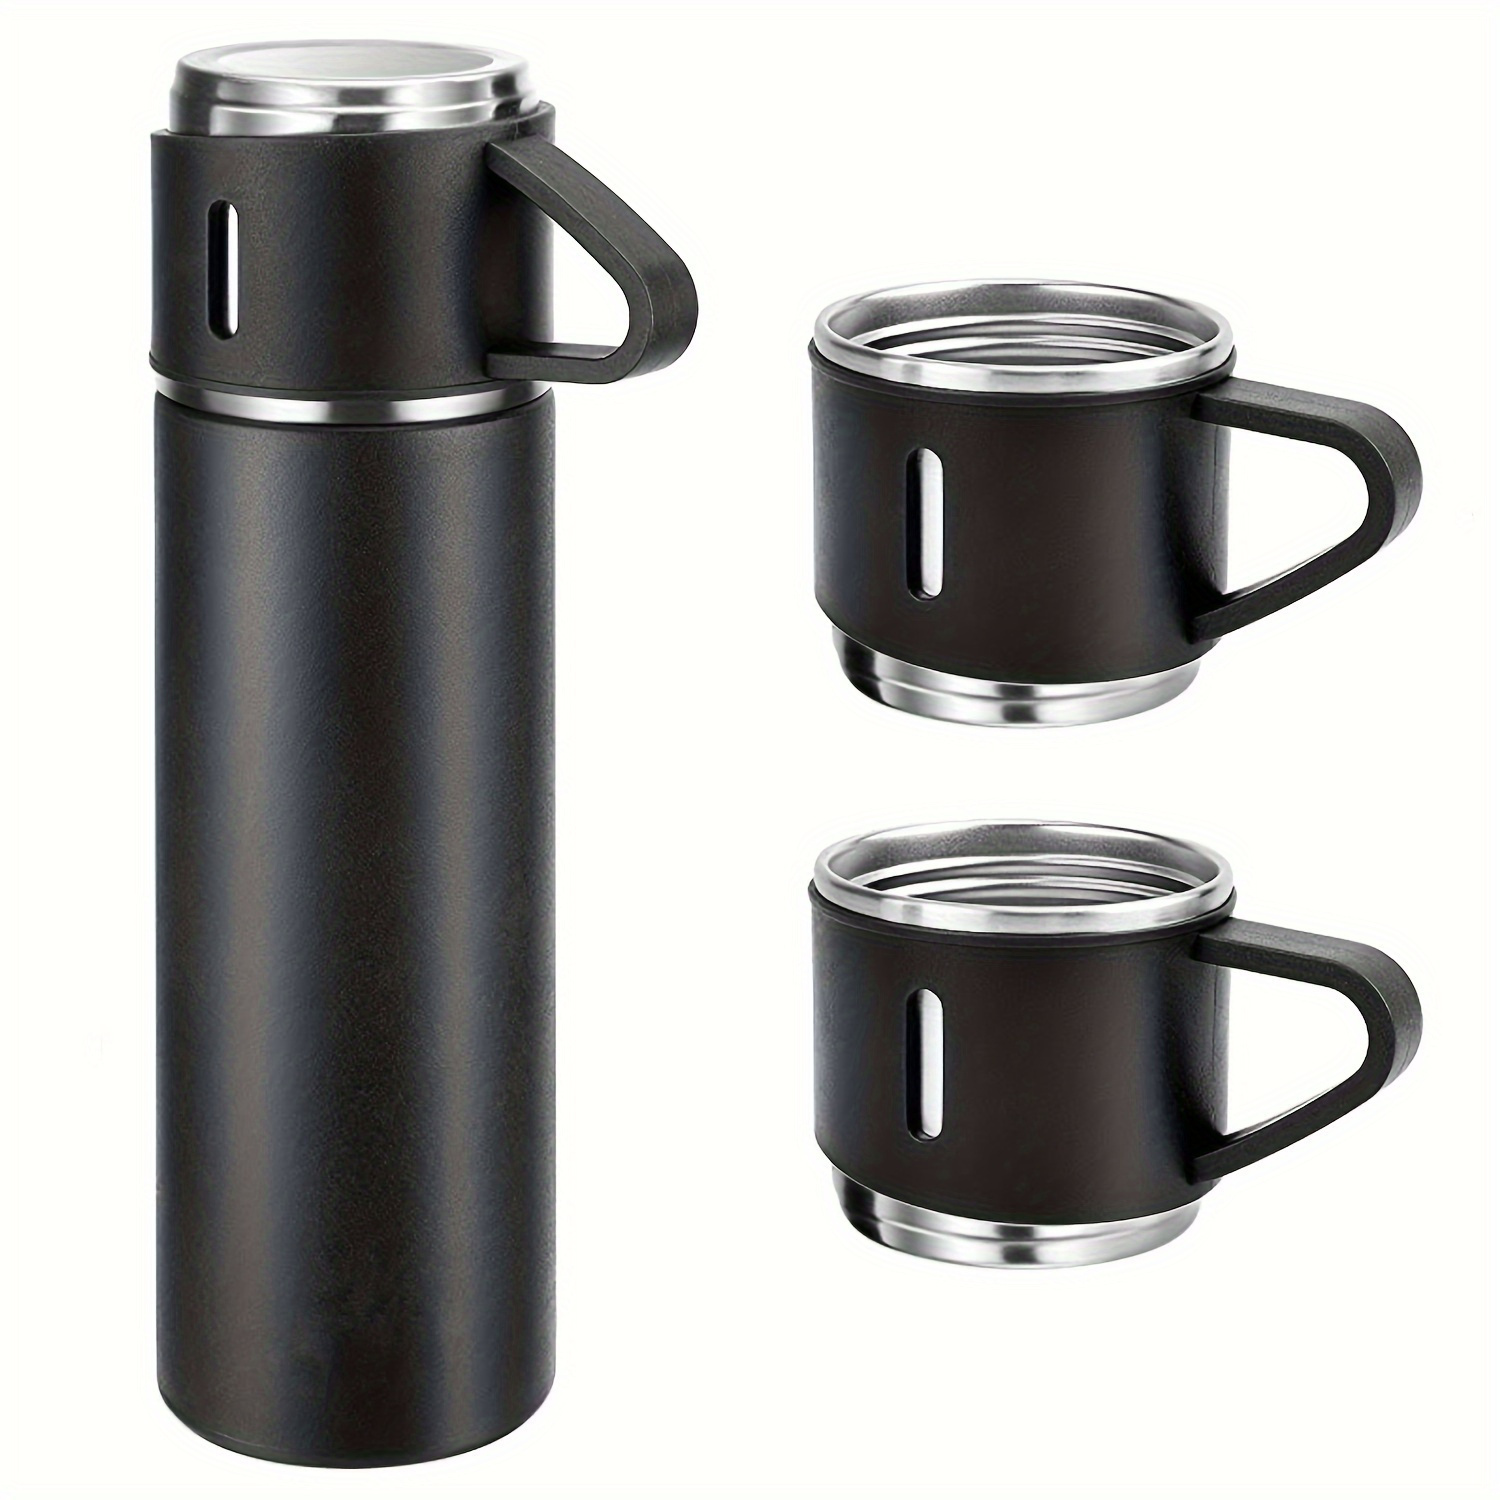 

Vacuum Set, Business Thermal Mug 500ml/16.9oz, Stainless Steel Vacuum Insulated Bottle With Cup For Coffee Hot Drink And Cold Drink, Water , Back To School Supplies